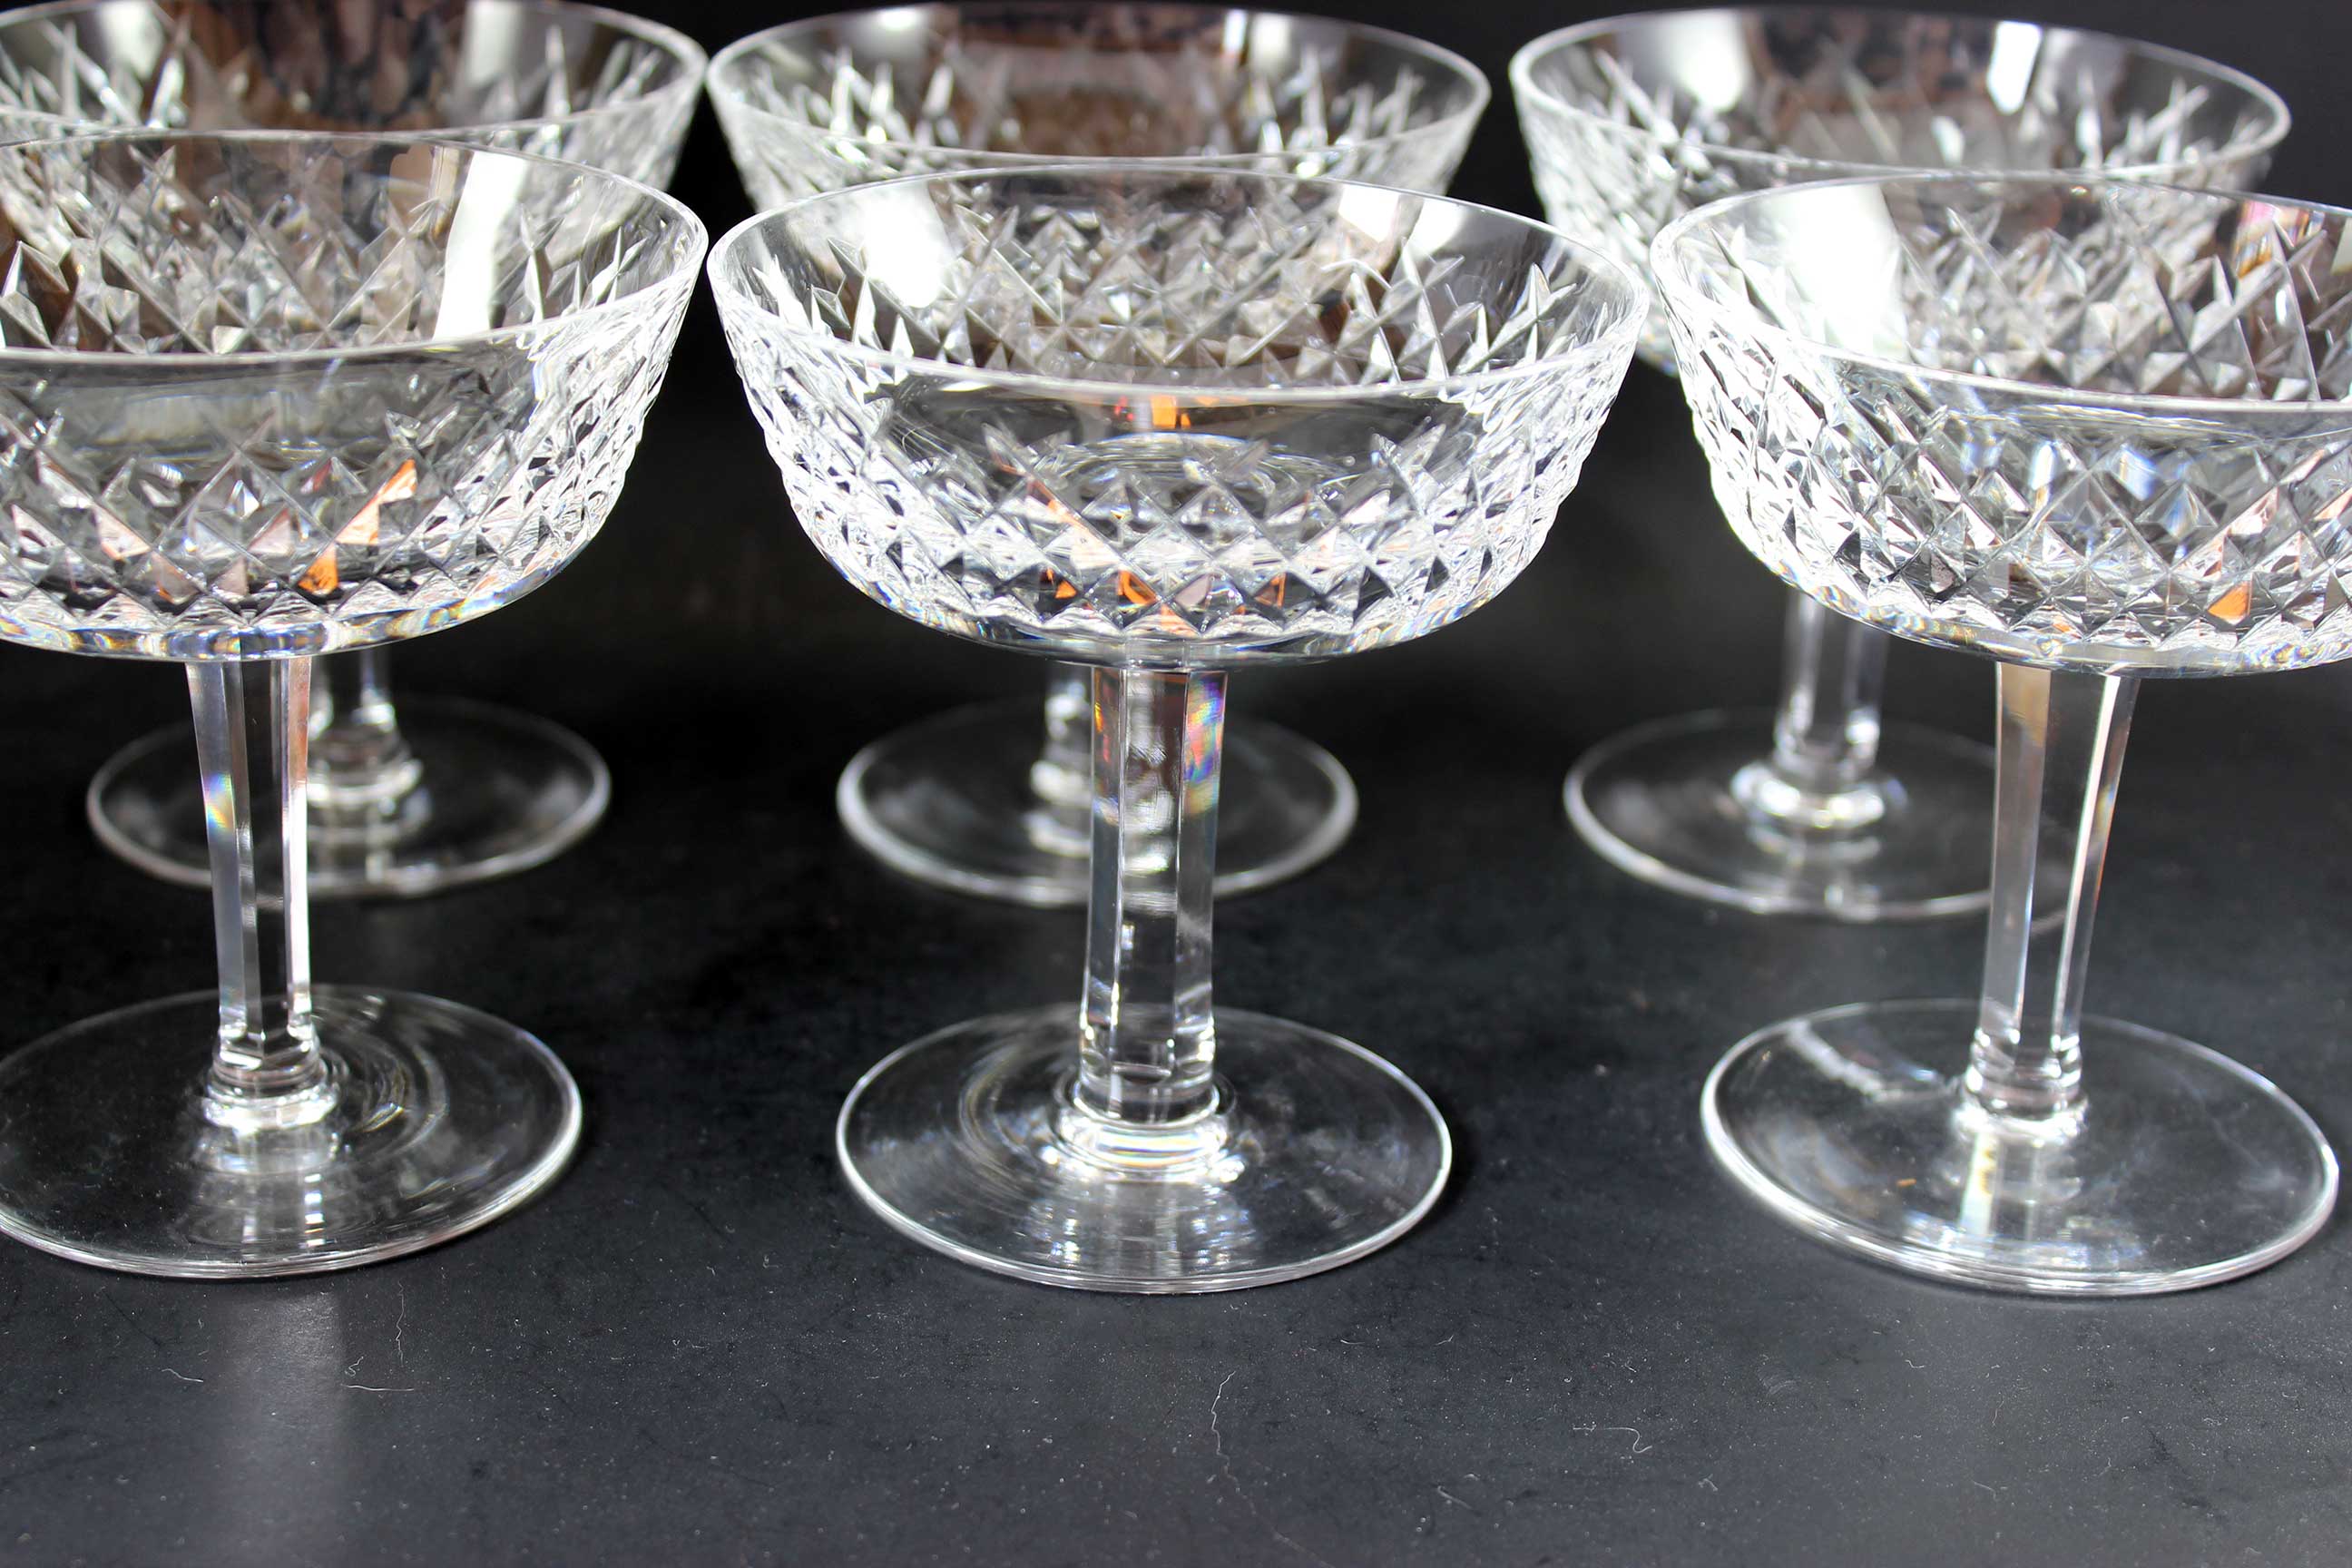 Waterford Crystal, Alana, High Dessert/Champagne Glasses